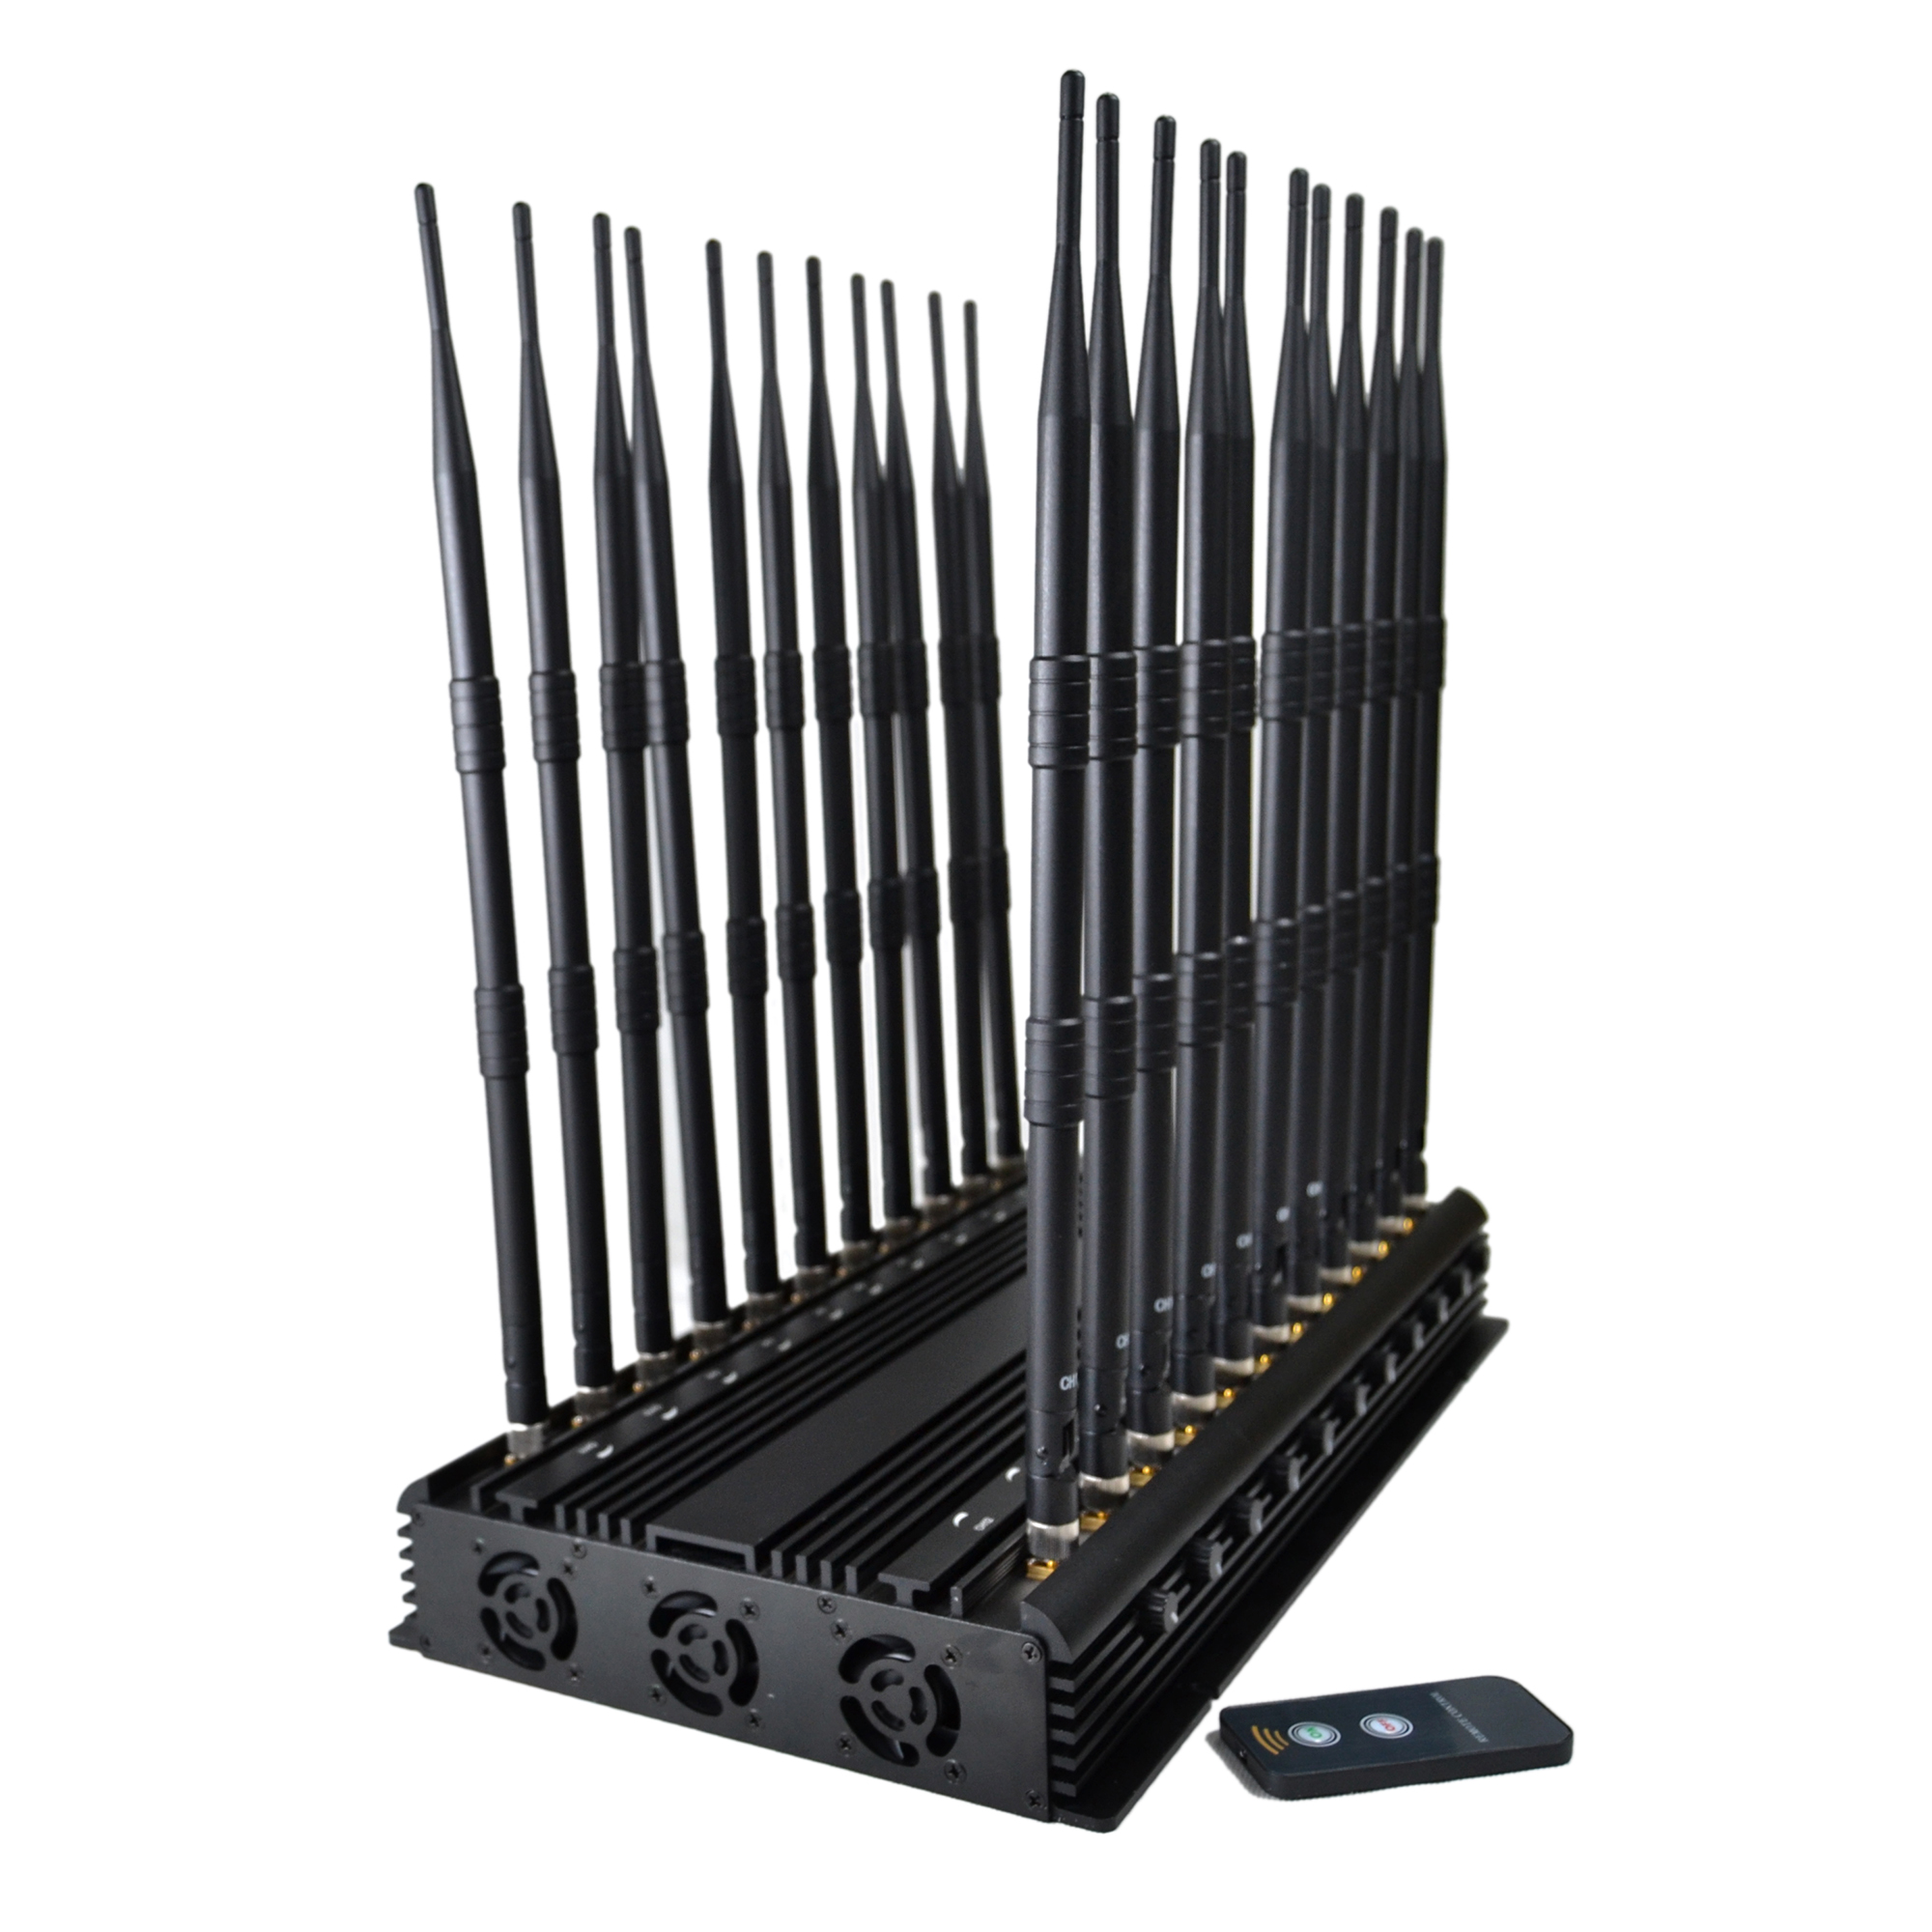 World First 22 Antennas Wireless Signal Jammer For Full Bands 5GLTE 2G 3G 4G Wi-Fi GPS LOJACK ...